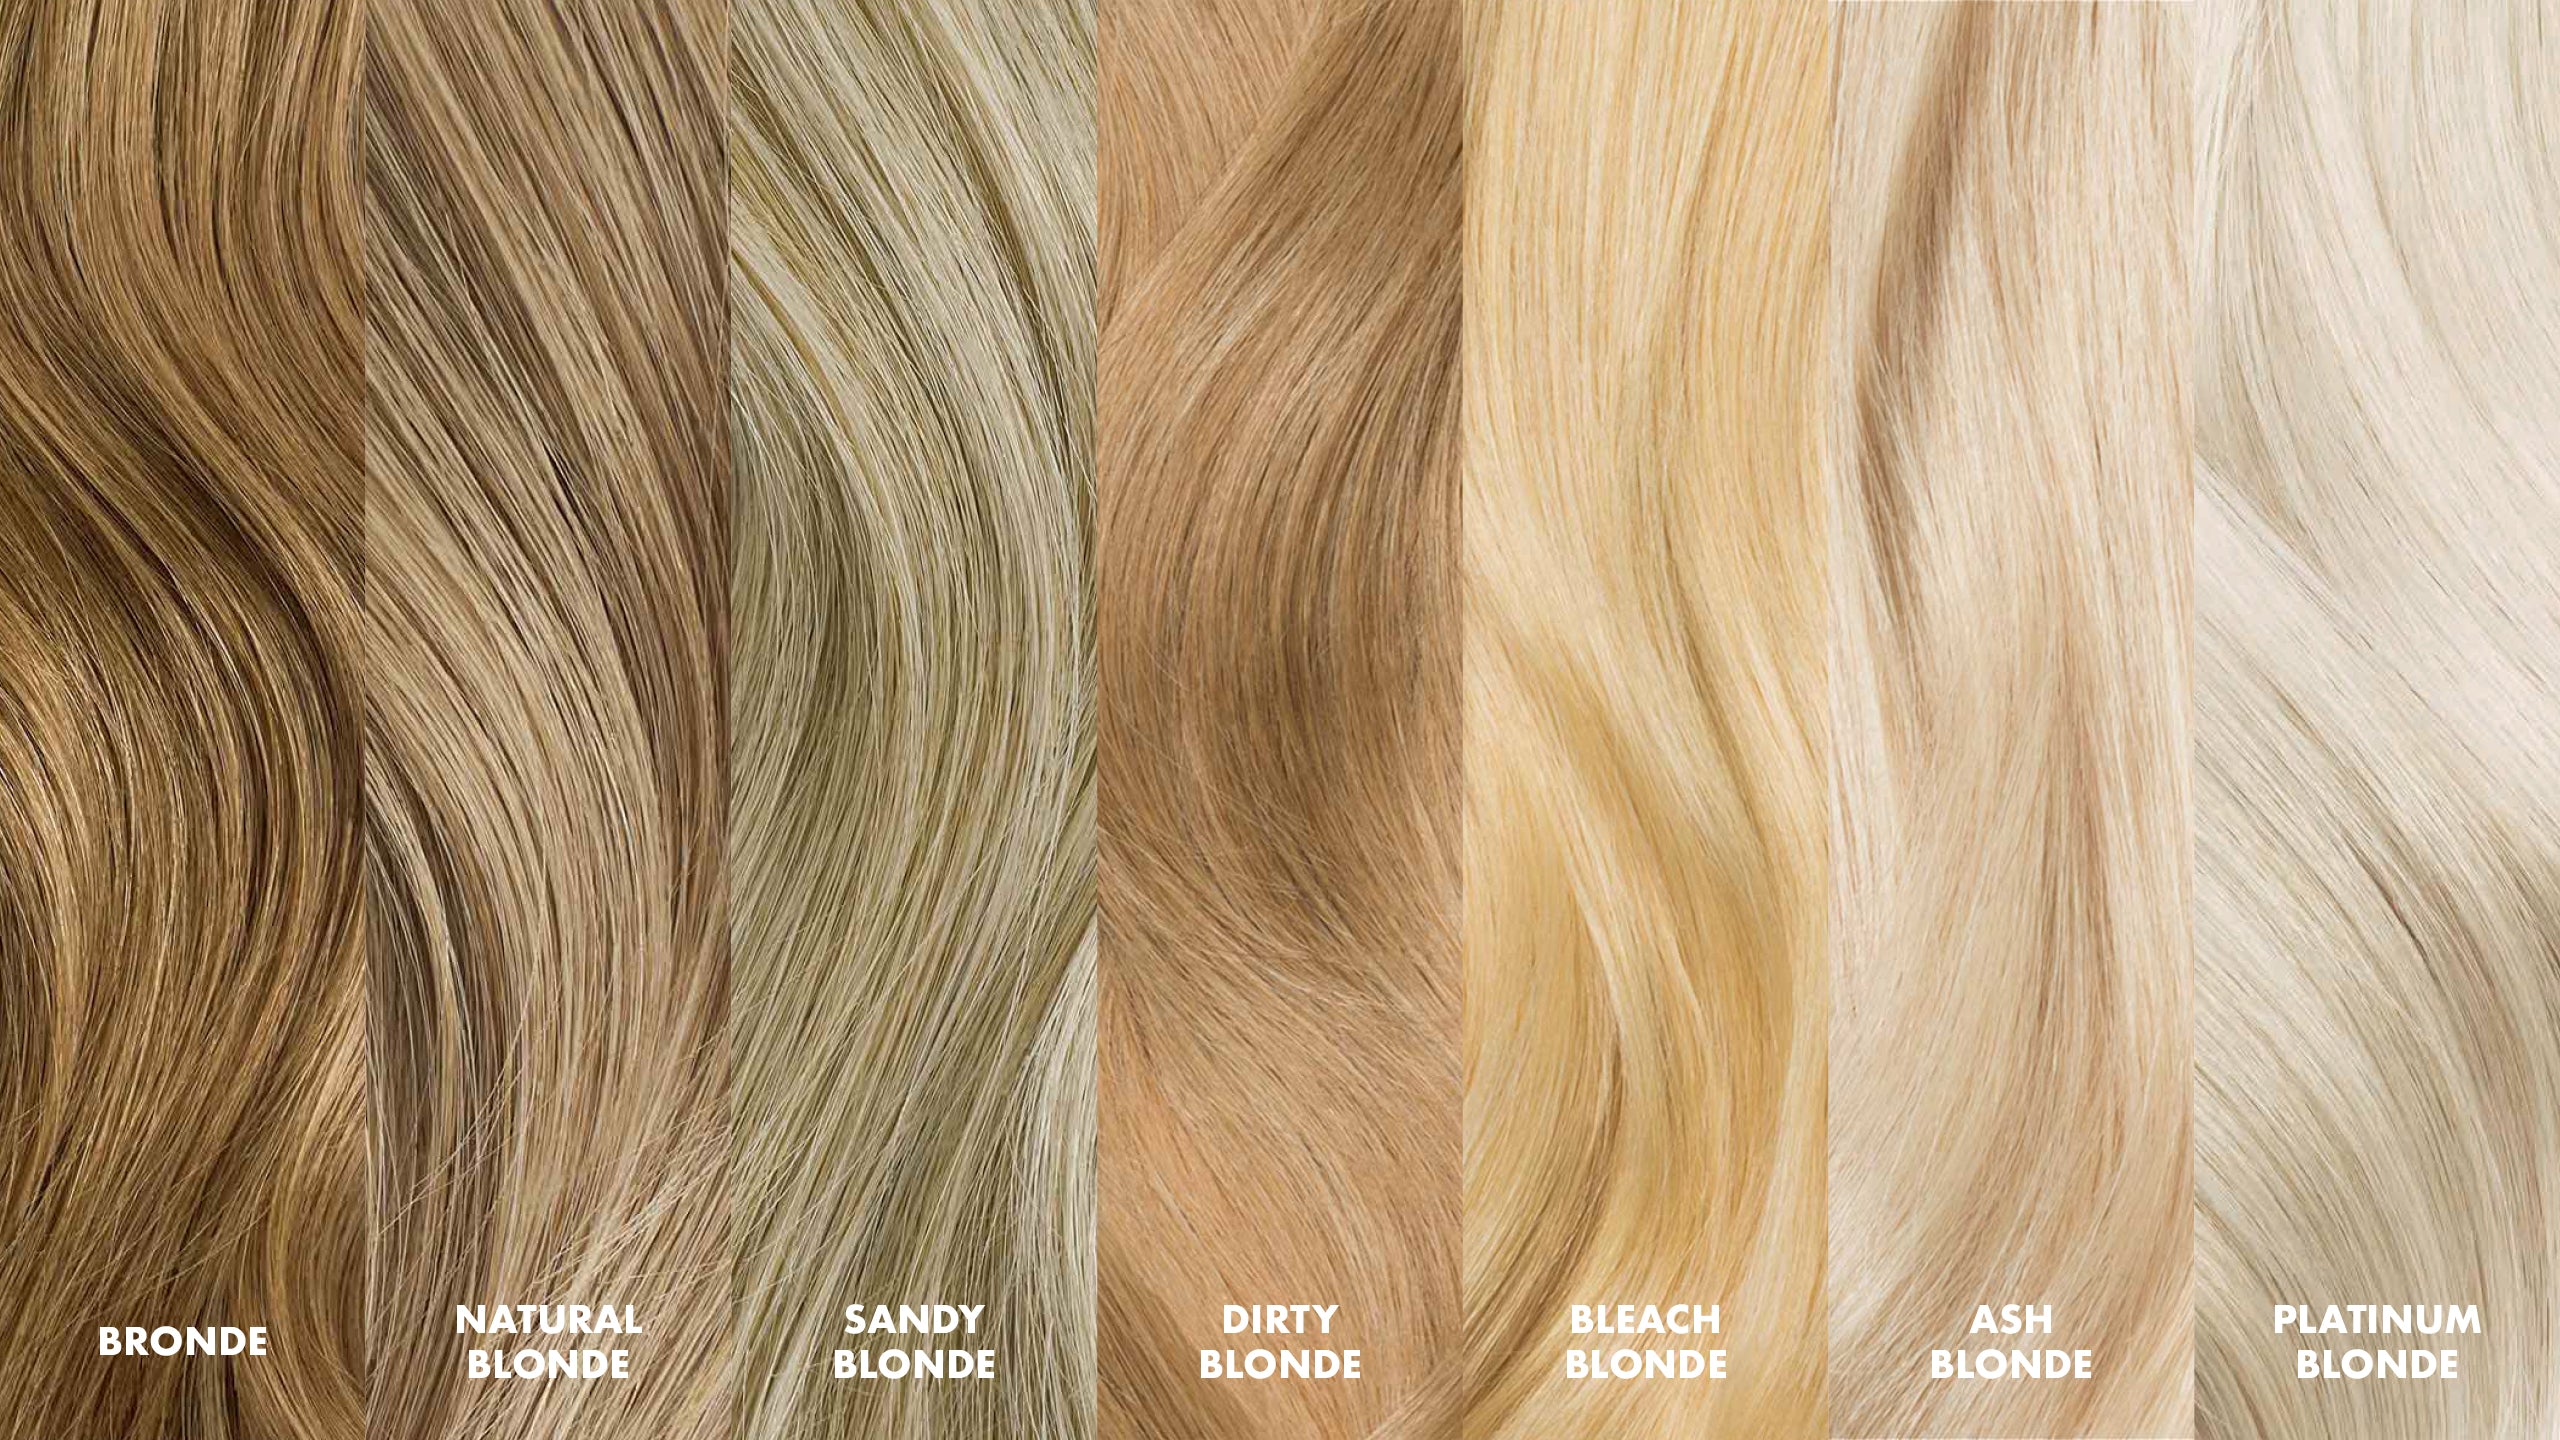 4. The Difference Between Ash Blonde and Platinum Blonde Hair - wide 4